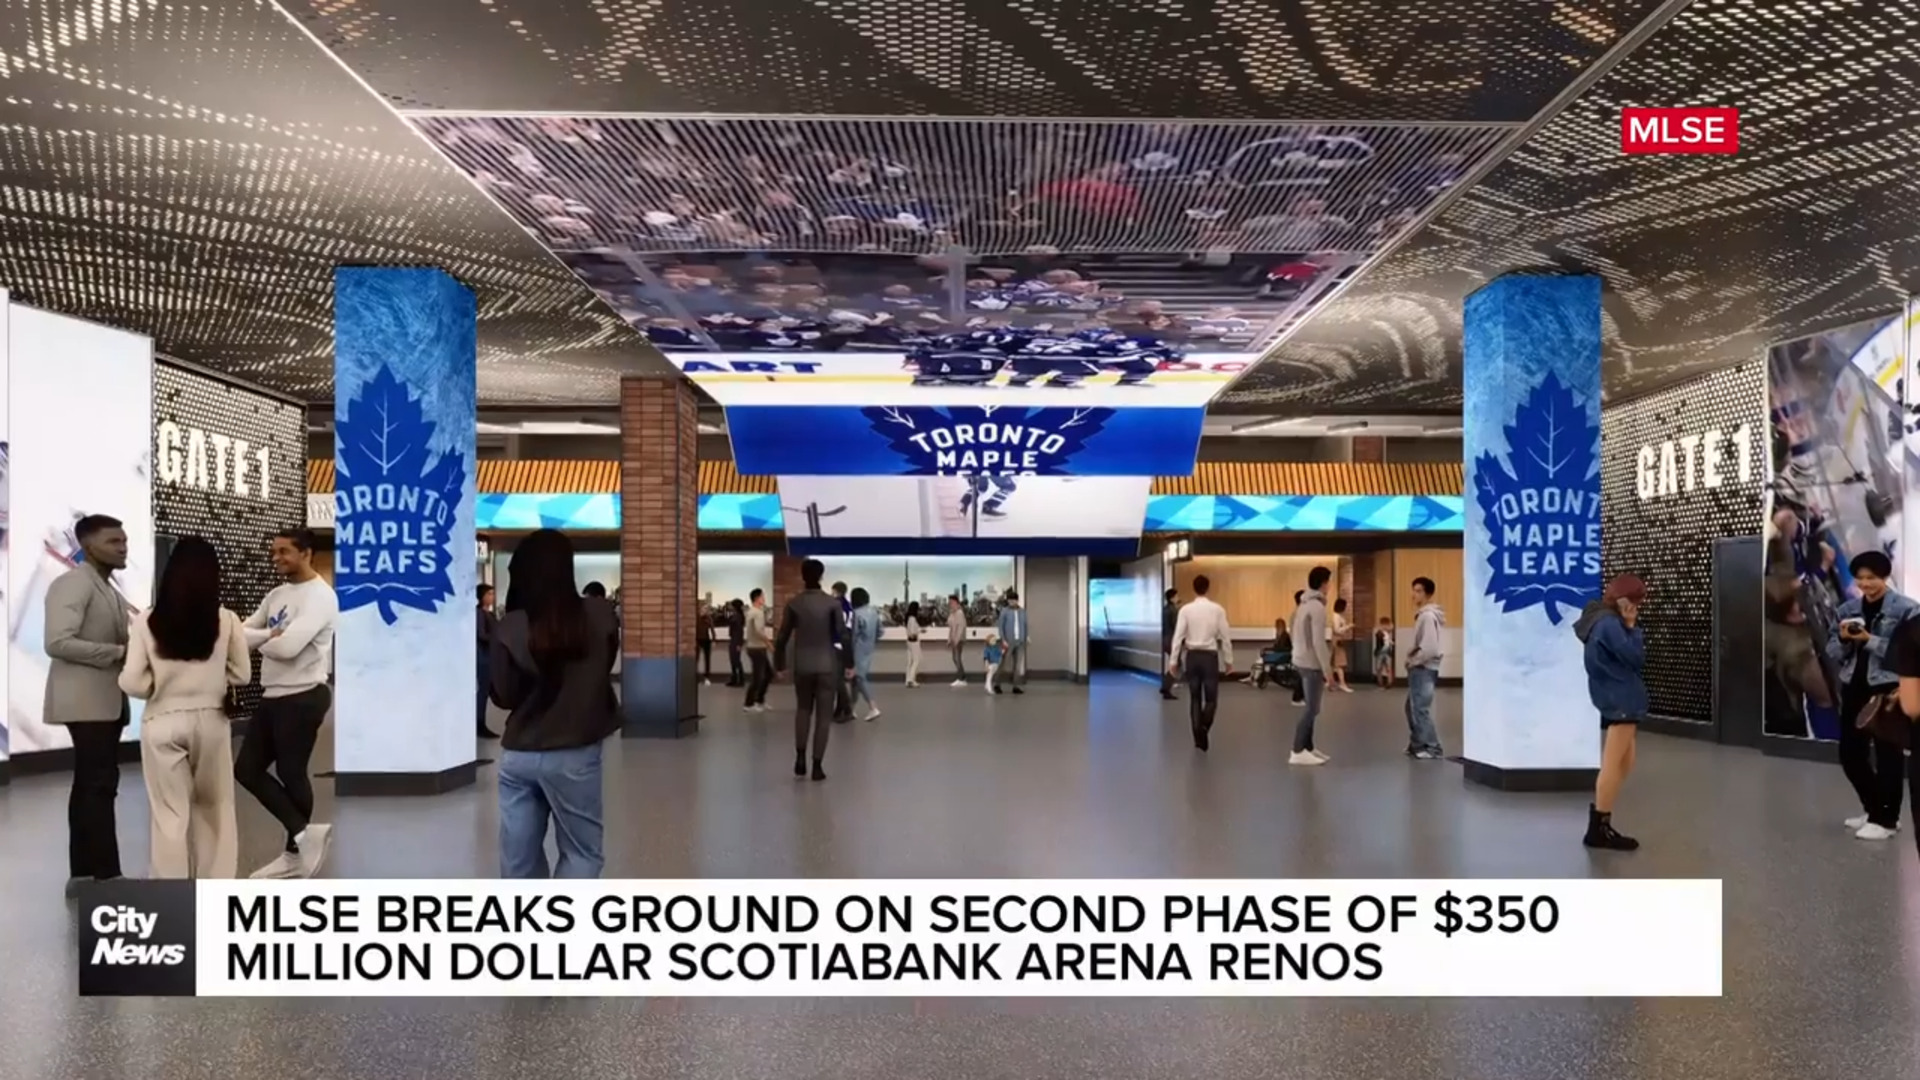 How MLSE is hoping to change fans experience at Leafs and Raptors games